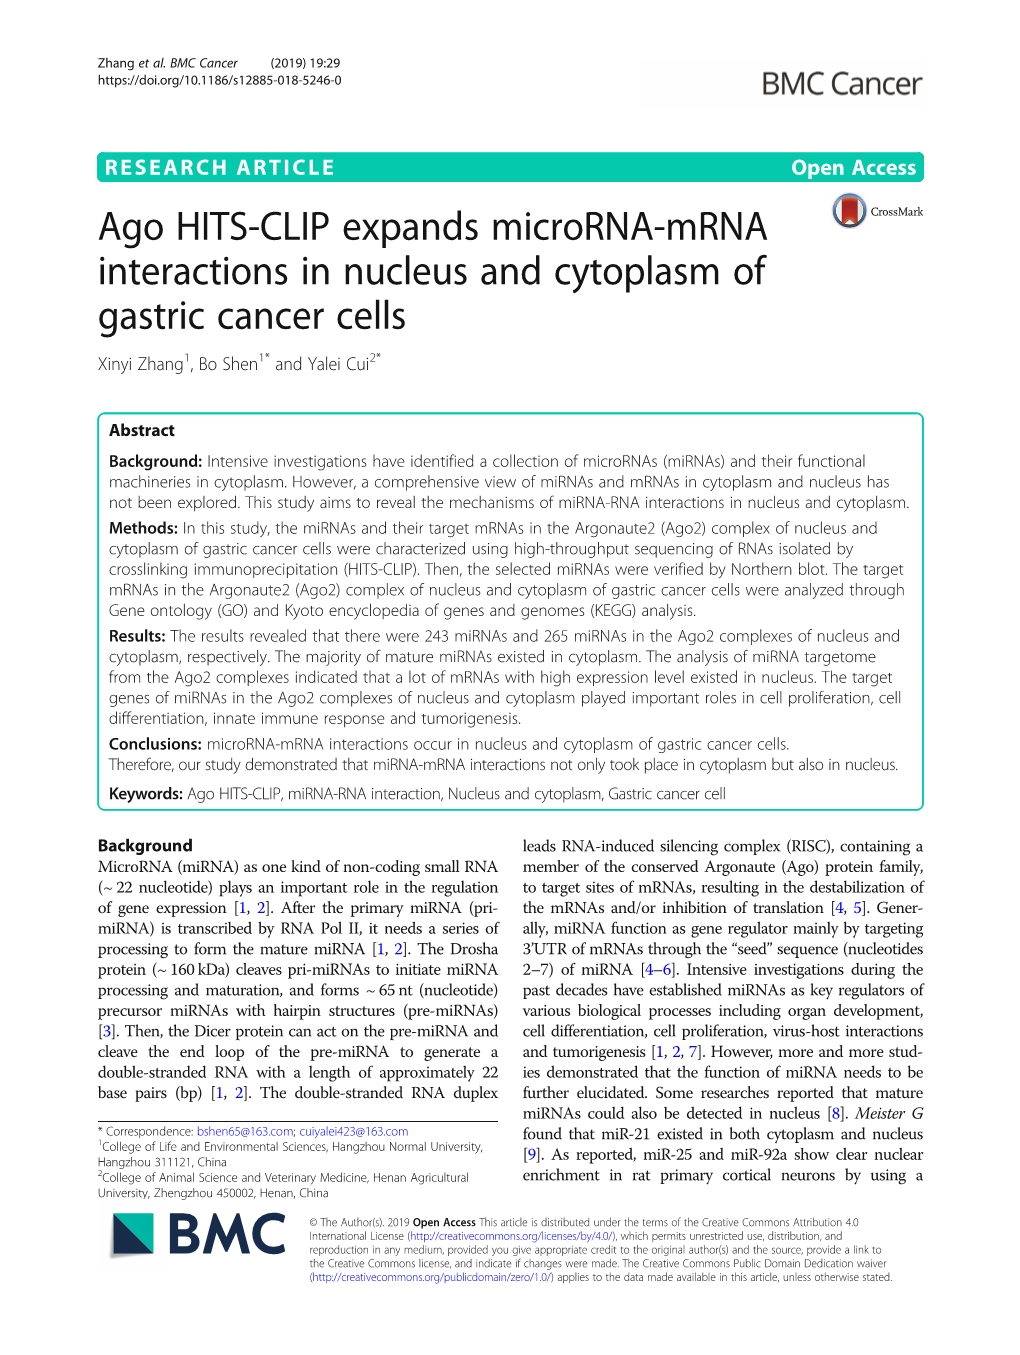 Ago HITS-CLIP Expands Microrna-Mrna Interactions in Nucleus and Cytoplasm of Gastric Cancer Cells Xinyi Zhang1, Bo Shen1* and Yalei Cui2*